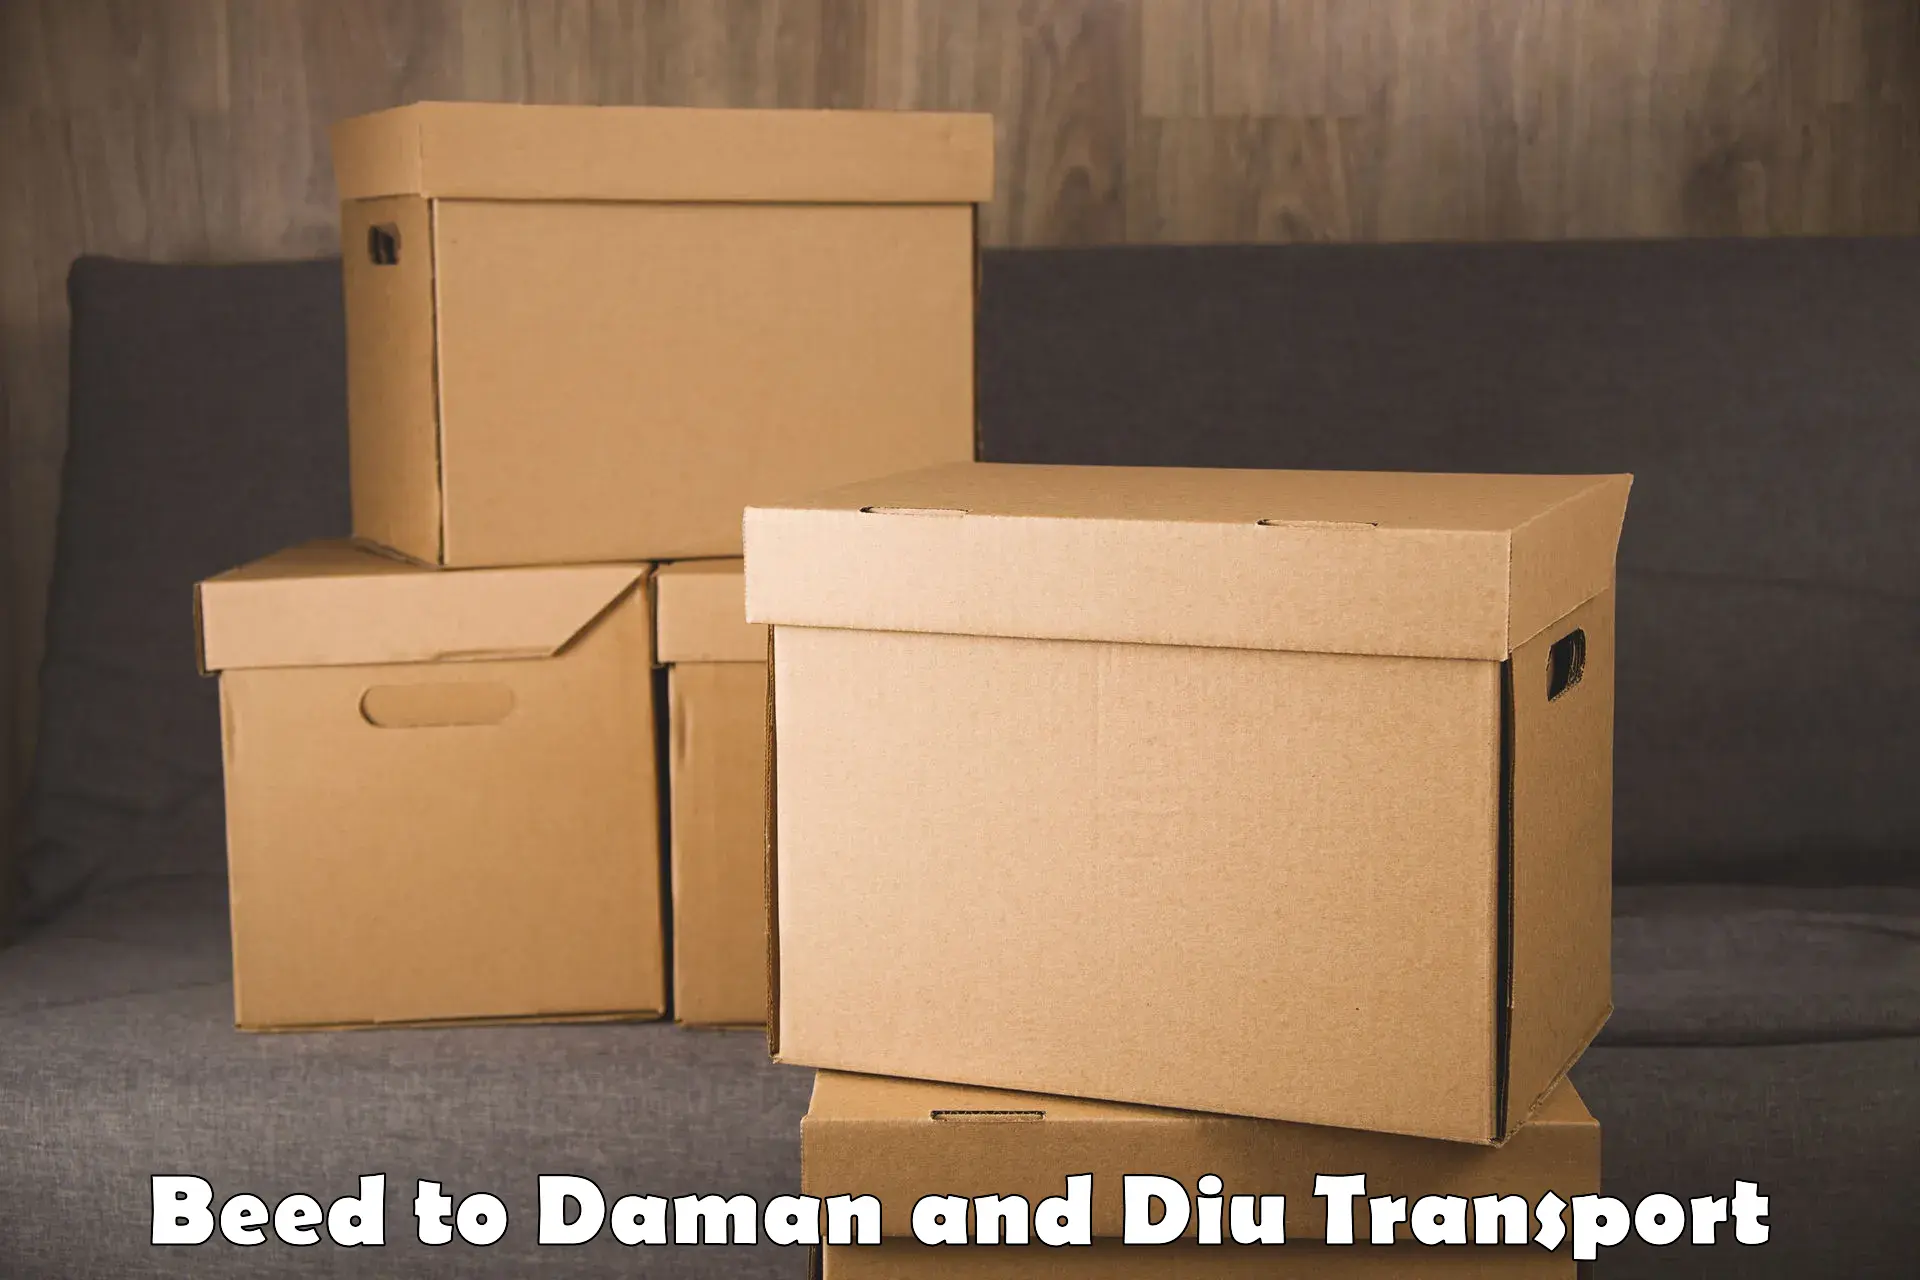 Daily parcel service transport Beed to Daman